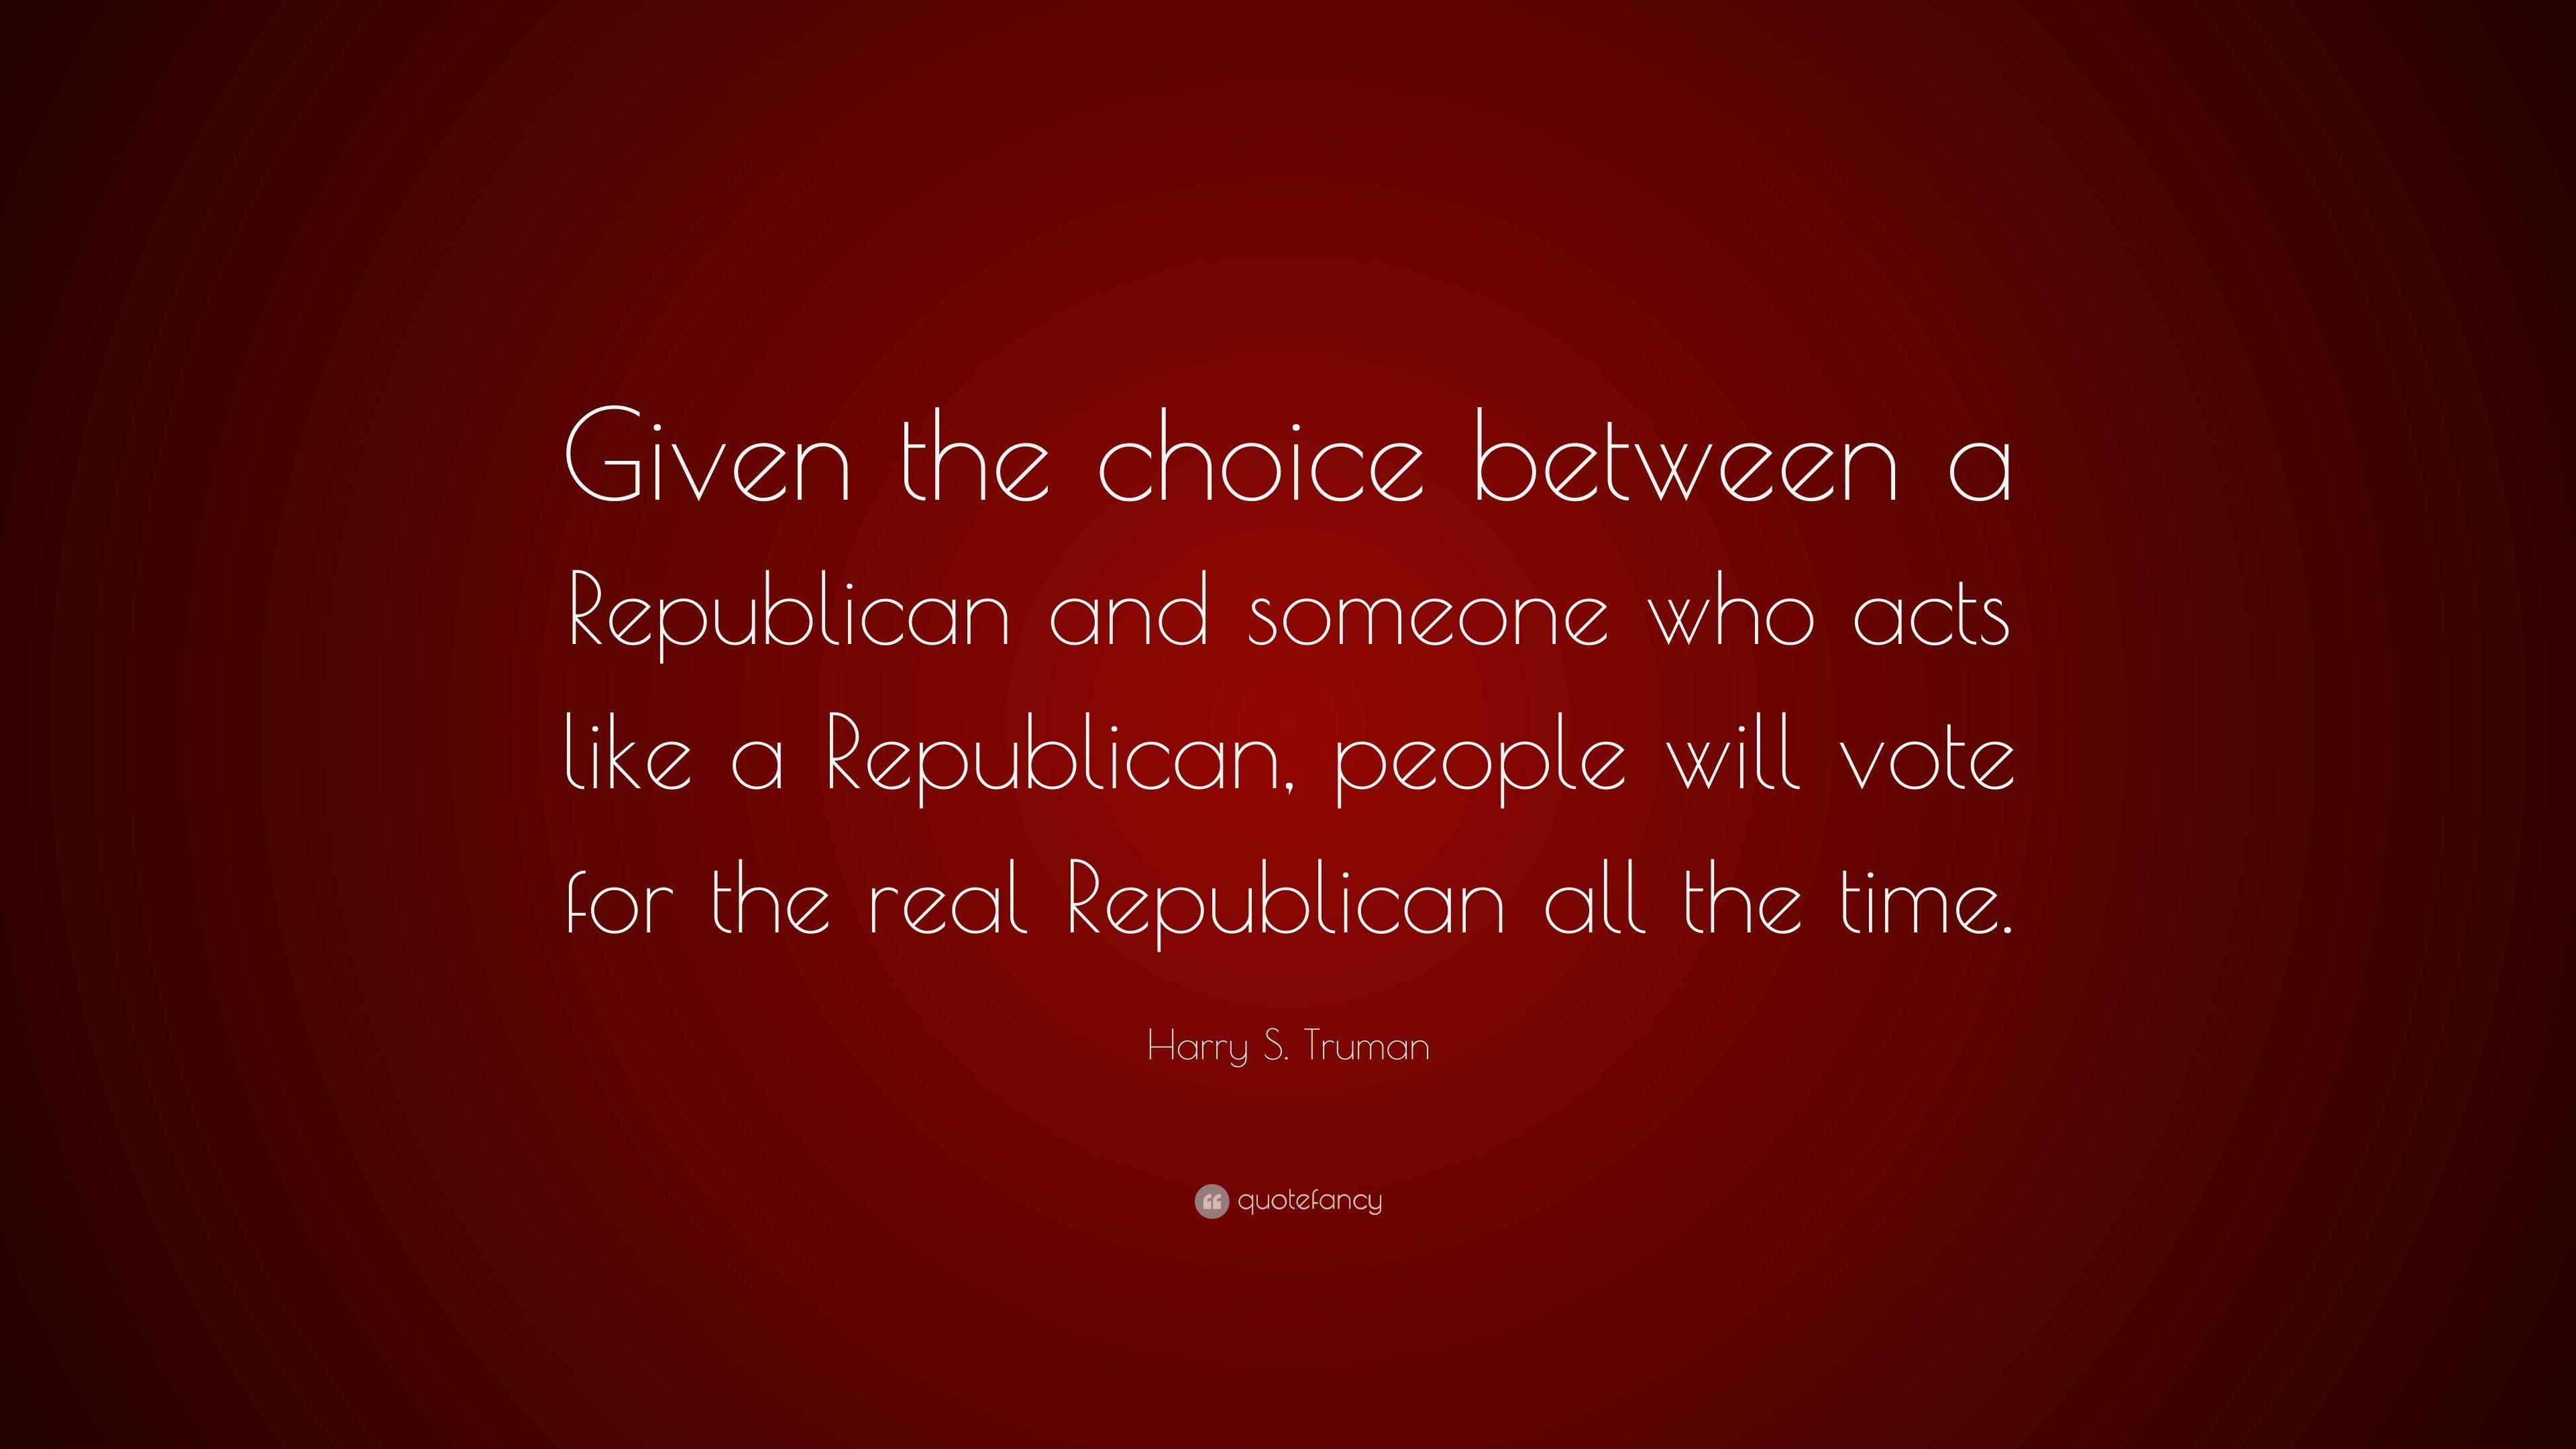 Harry S. Truman Quote: “Given the choice between a Republican